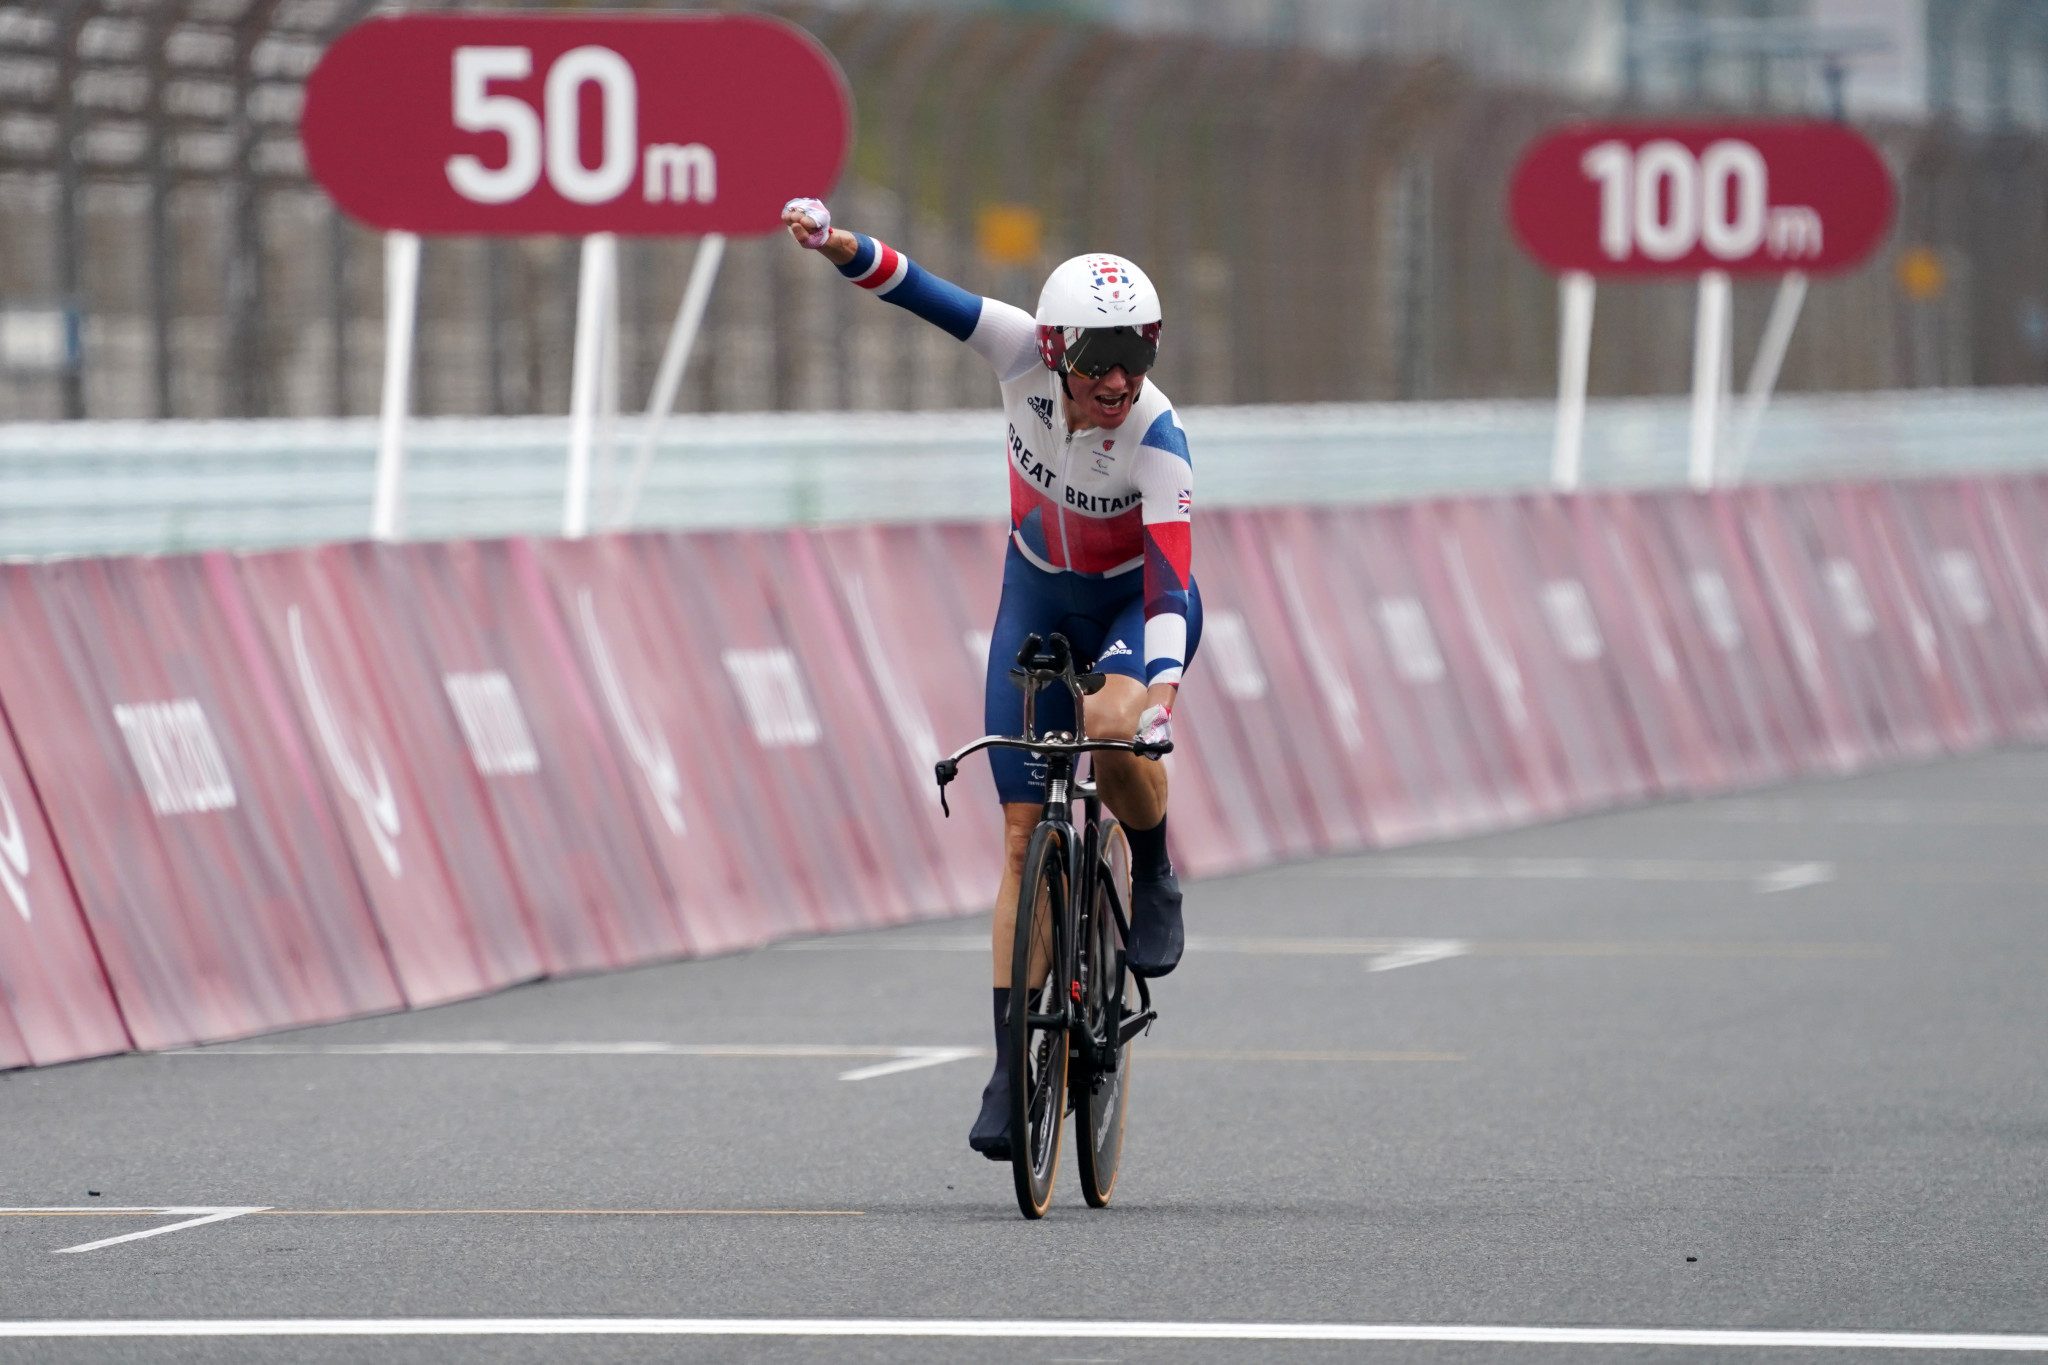 Storey becomes Britain's most decorated Paralympian following time trial victory